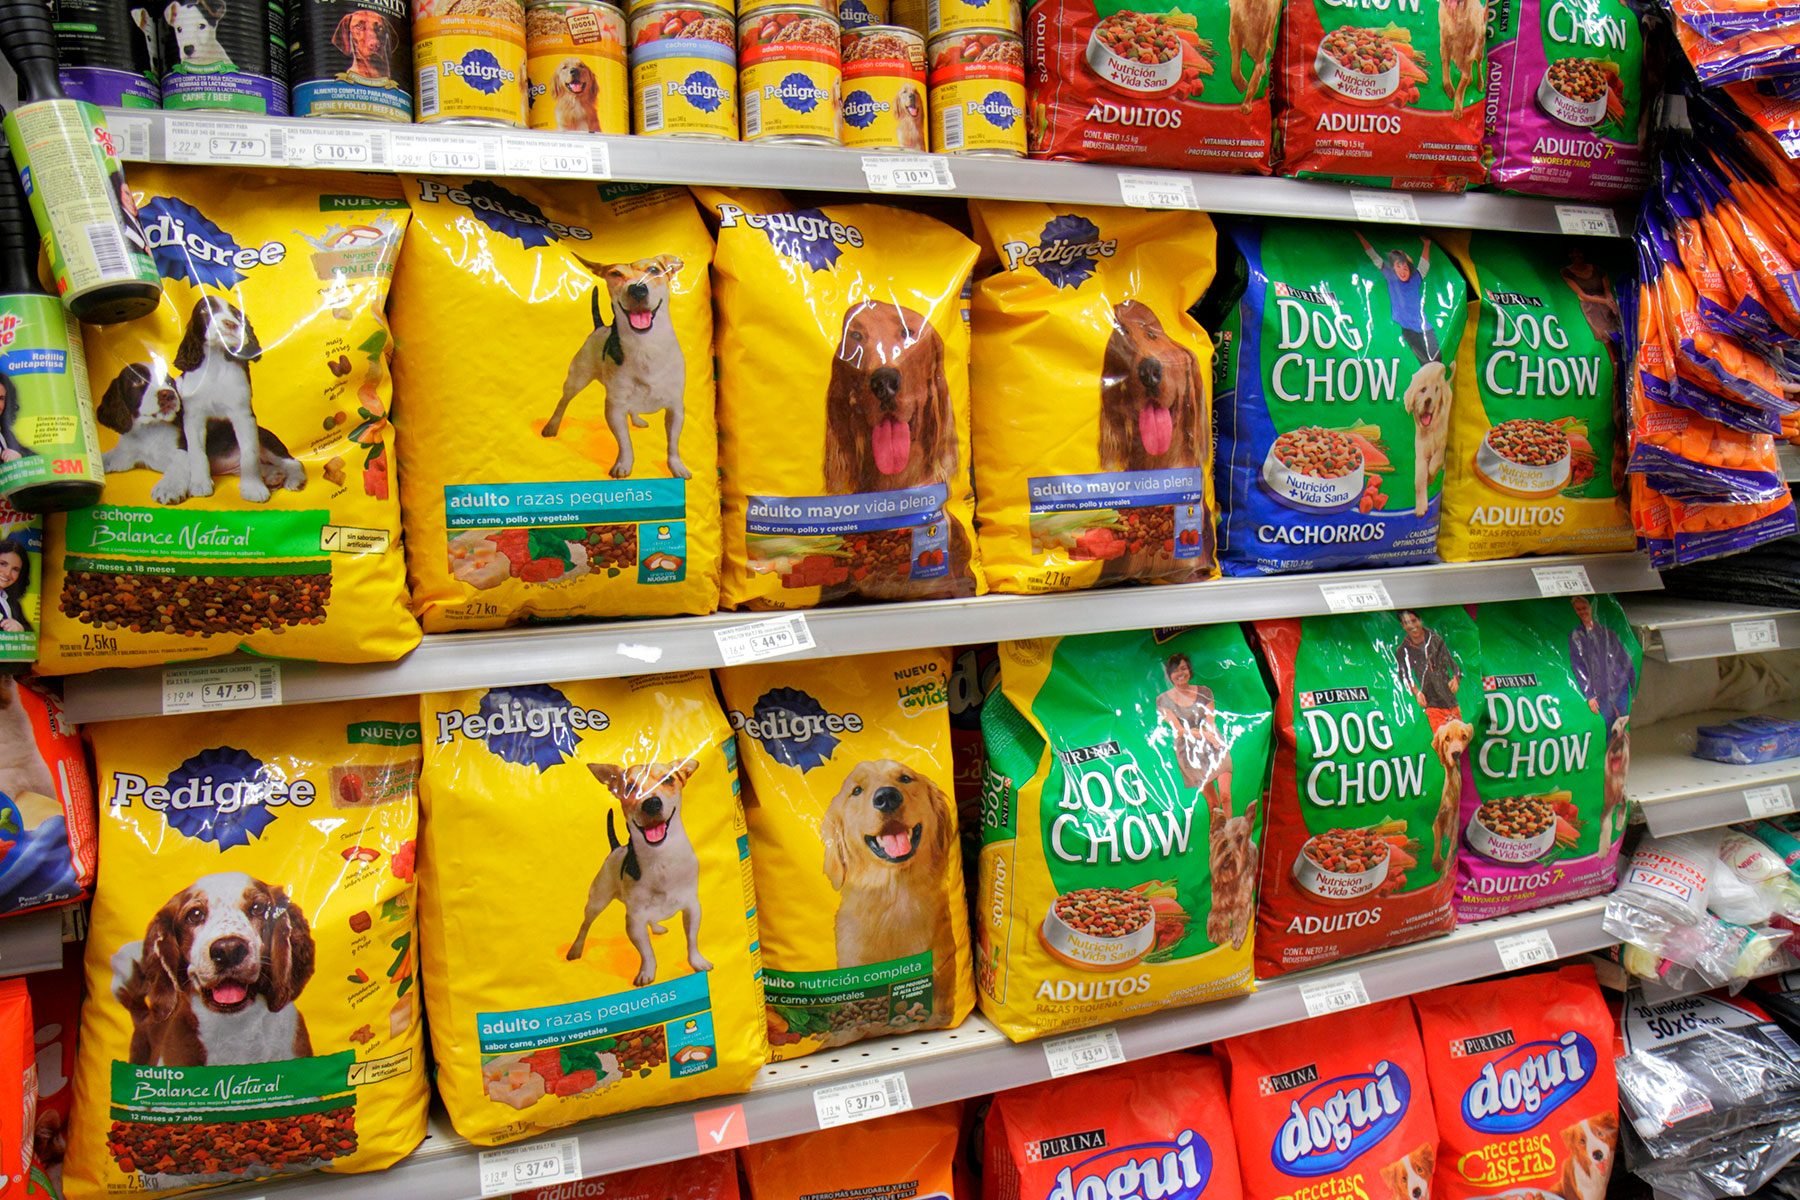 Is There Going to Be a Dog Food Shortage?